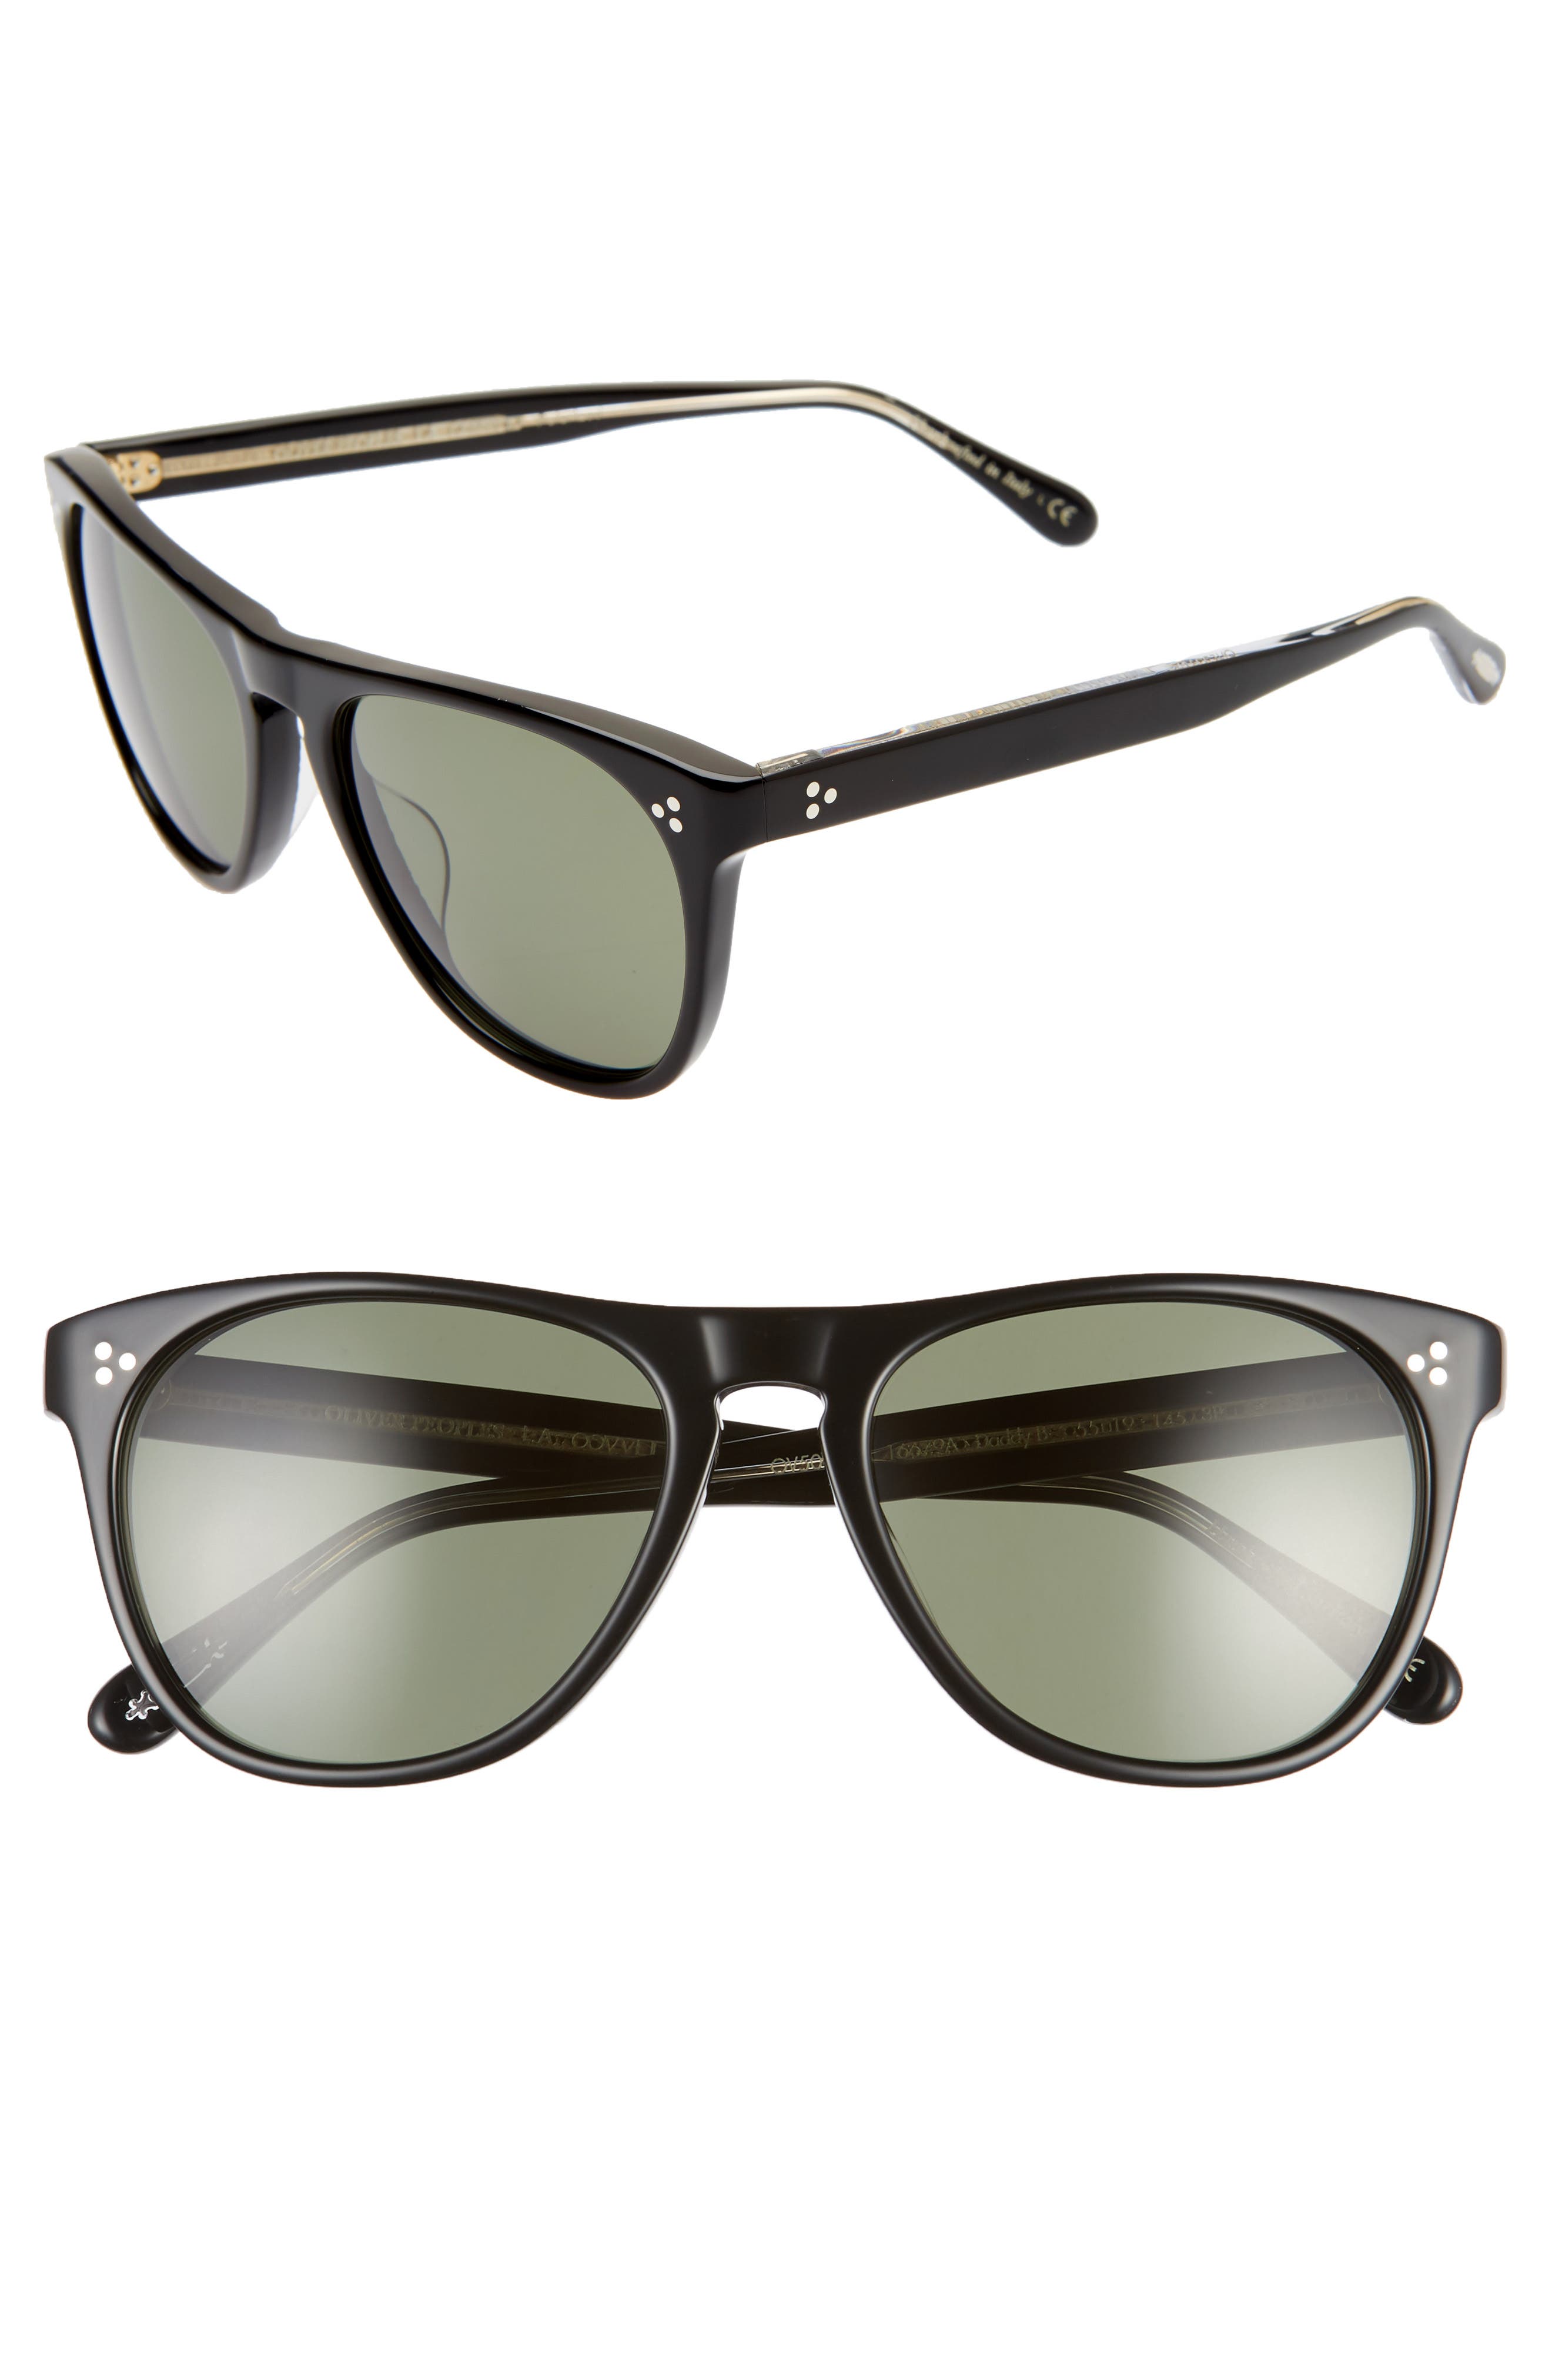 OLIVER PEOPLES DADDY B. 55MM POLARIZED RETRO SUNGLASSES